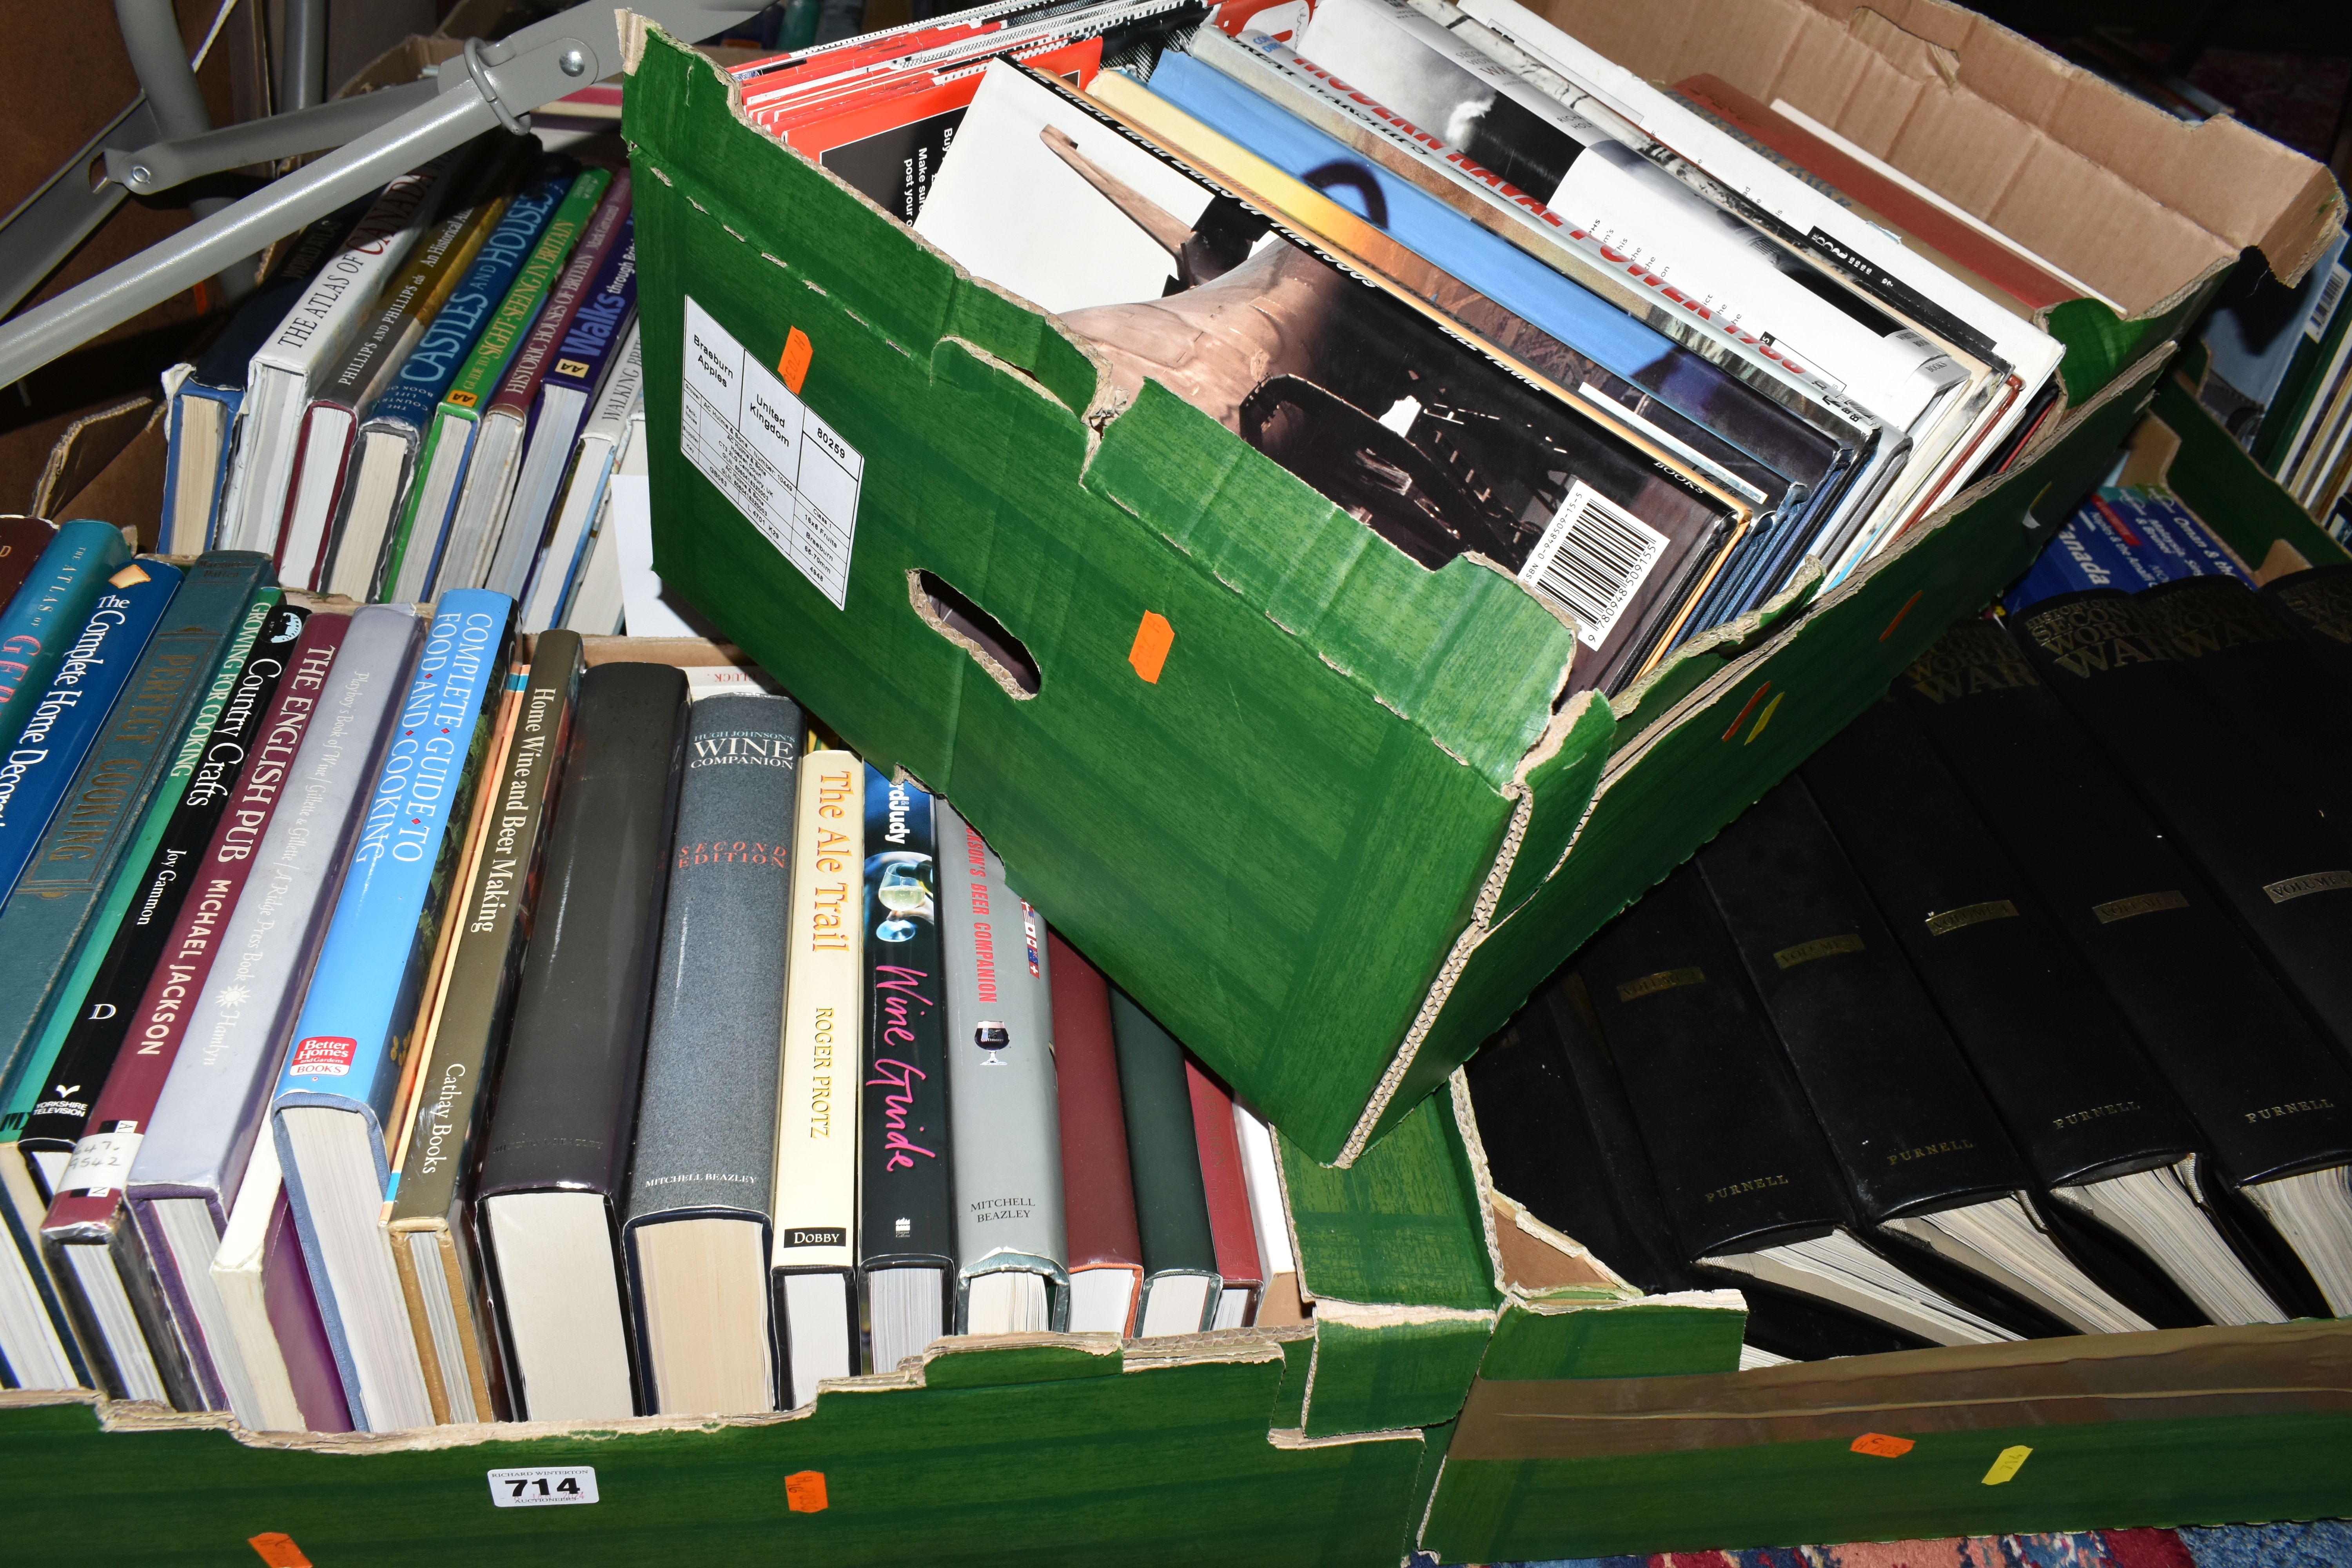 FIVE BOXES OF BOOKS & MAGAZINES containing approximately 110 miscellaneous book titles, mostly in